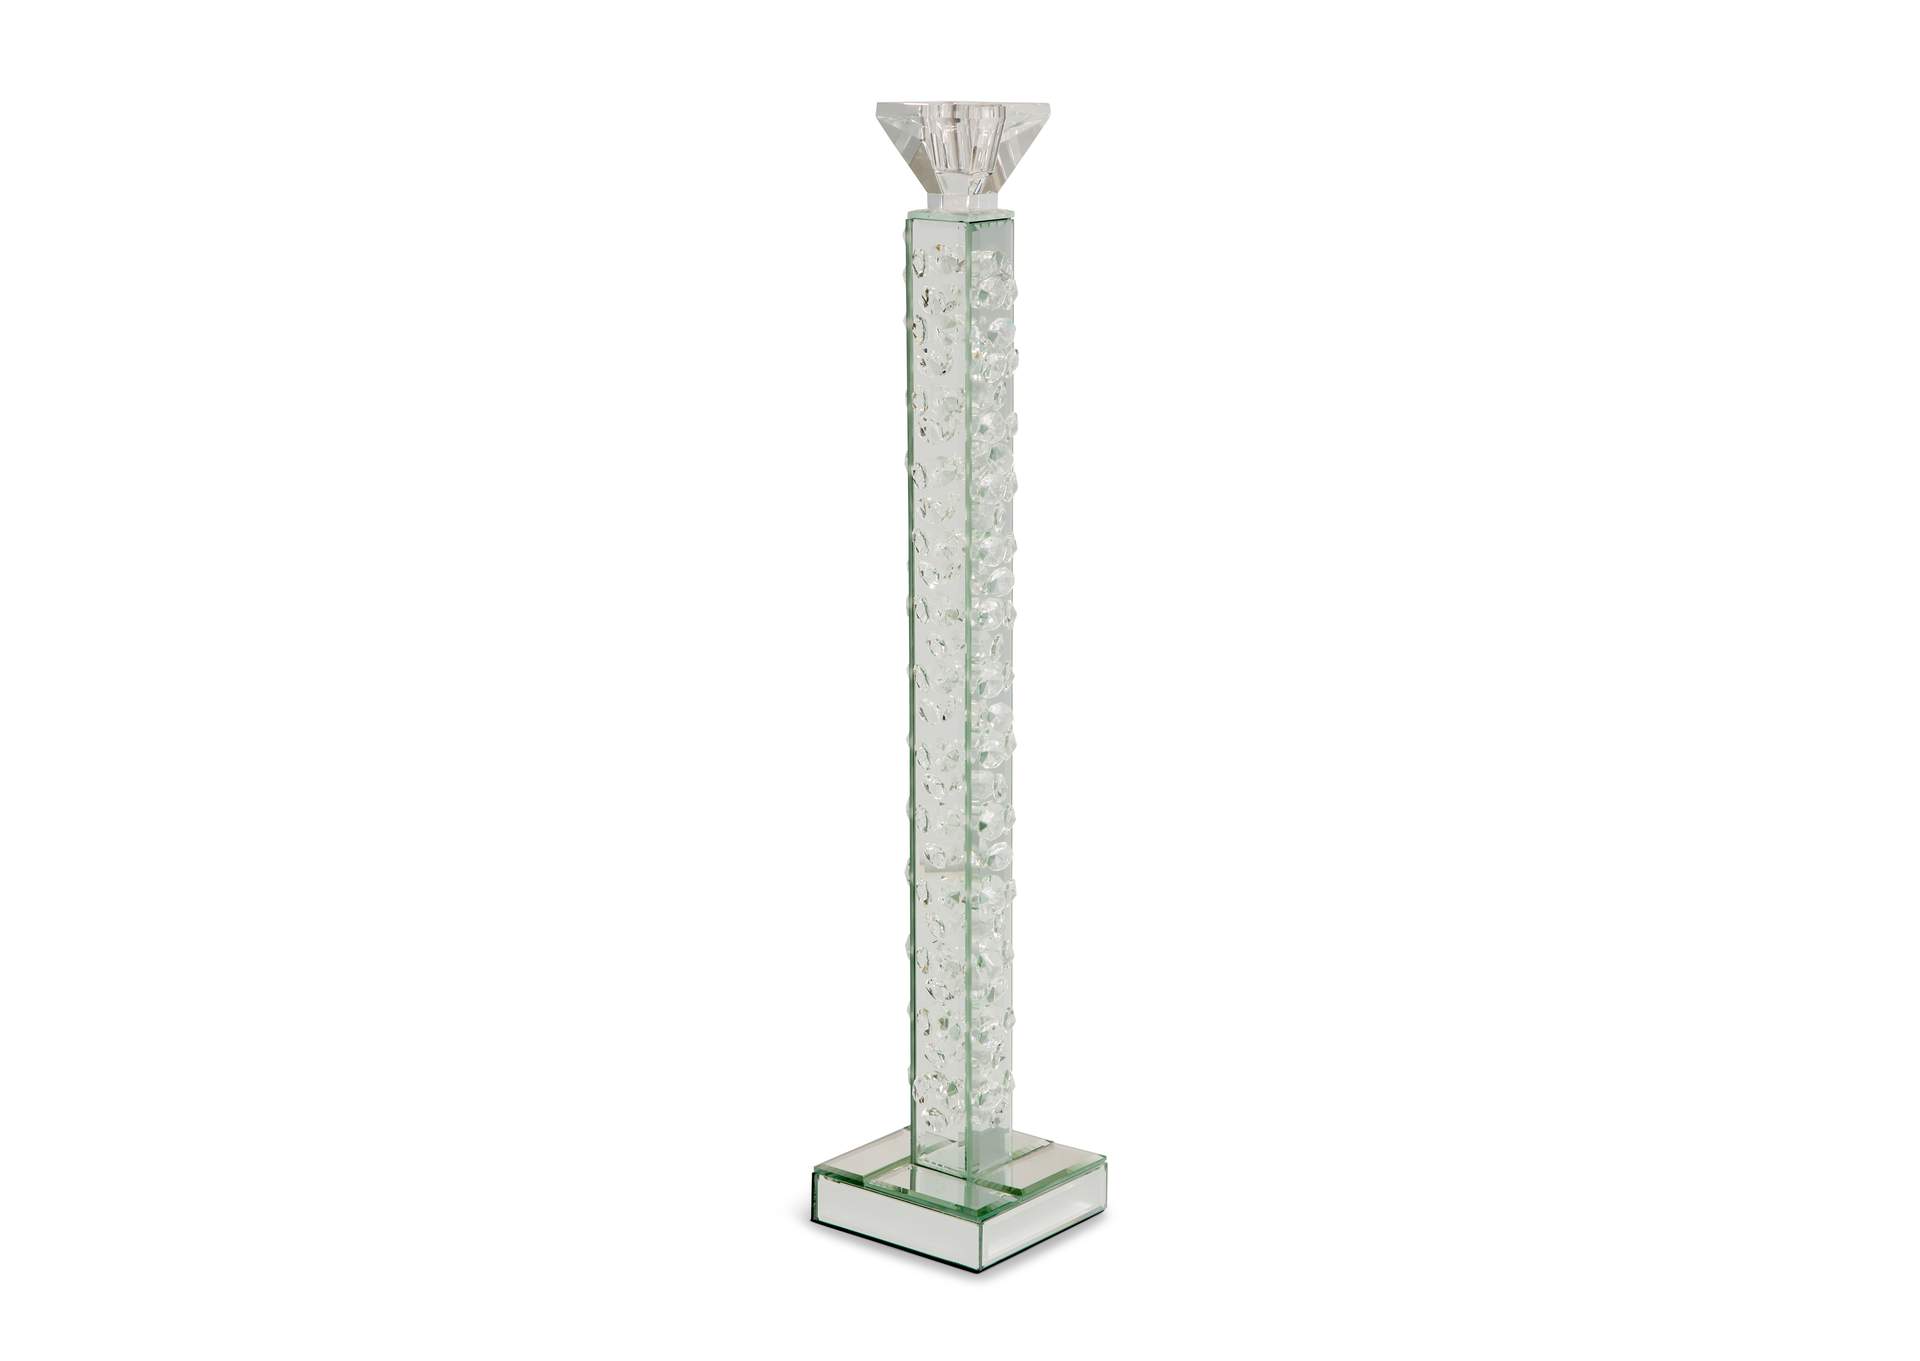 Montreal Slender Mirrored Crystal Candle Holder,Lg.Pack/6,Michael Amini (AICO)